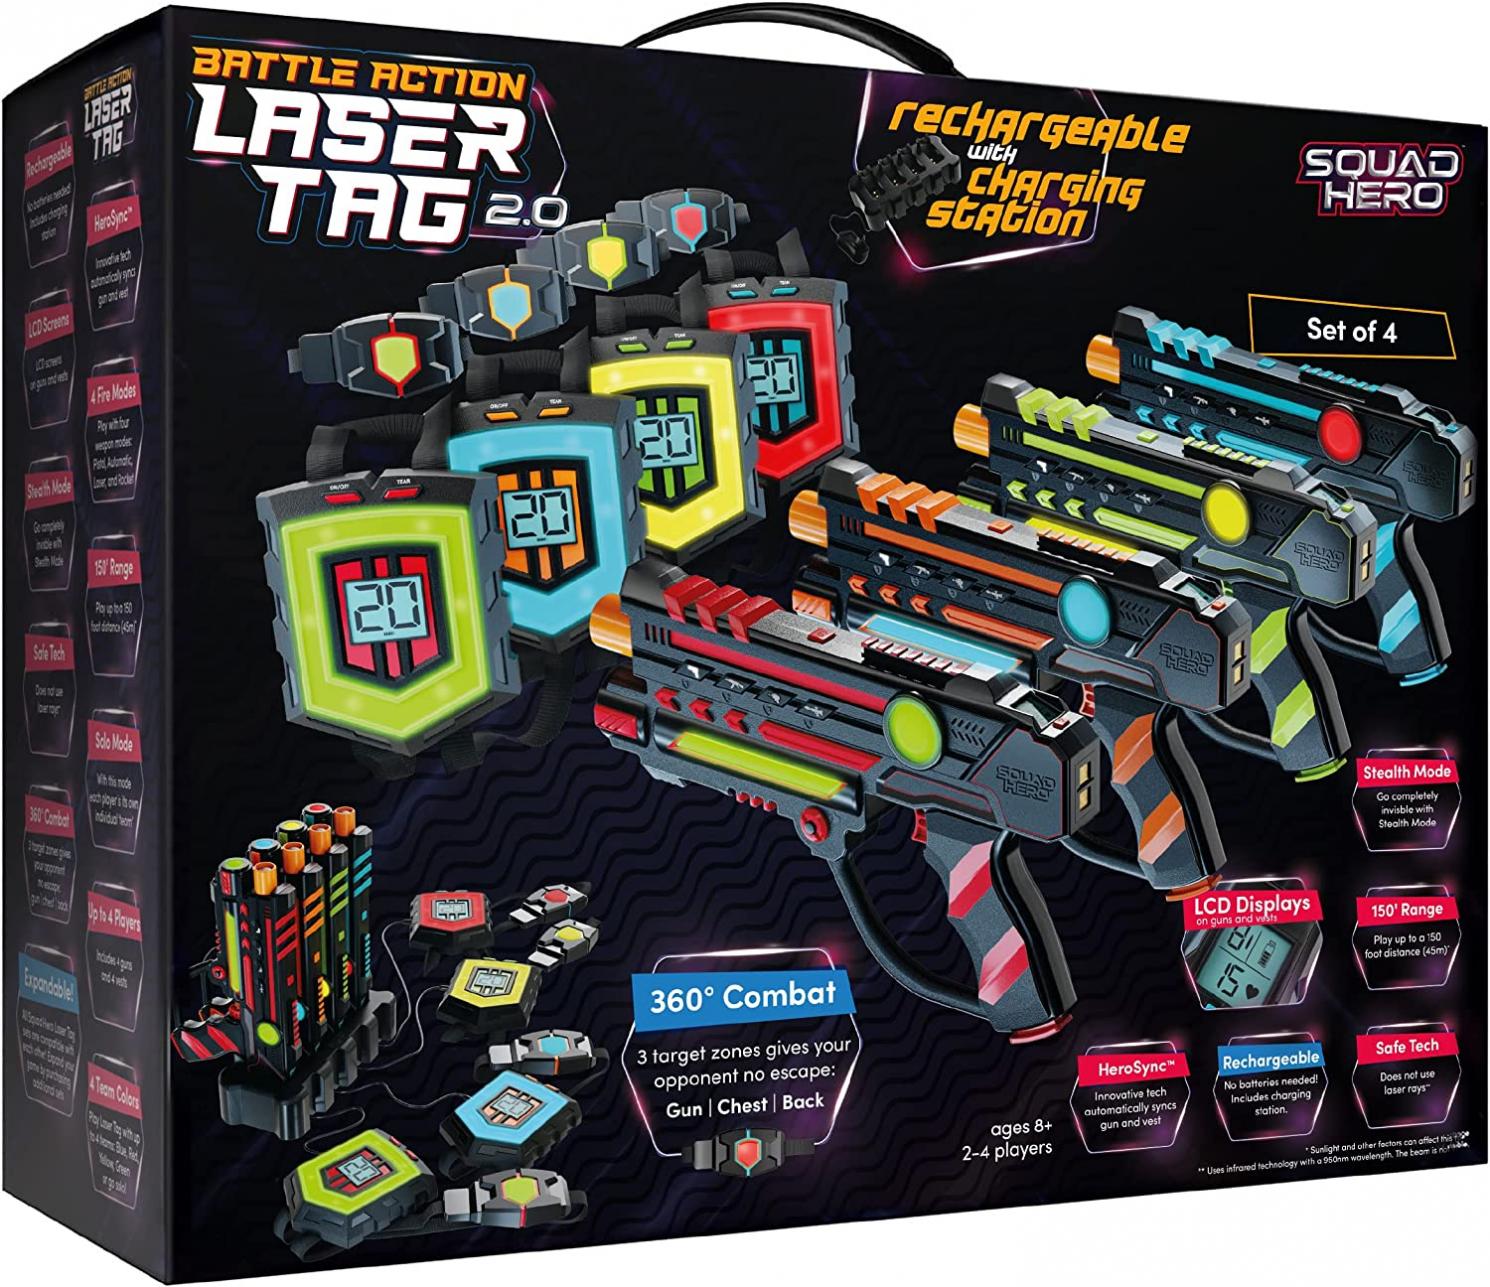 Squad Hero Rechargeable Laser Tag 360° Sensors + LCDs, 4 Set - Gift Ideas for Kids Teens and Adults Boys & Girls Family Fun - Cool Teenage Christmas Group Activity - Teen Gifts Ages 8+ Year Old Boy